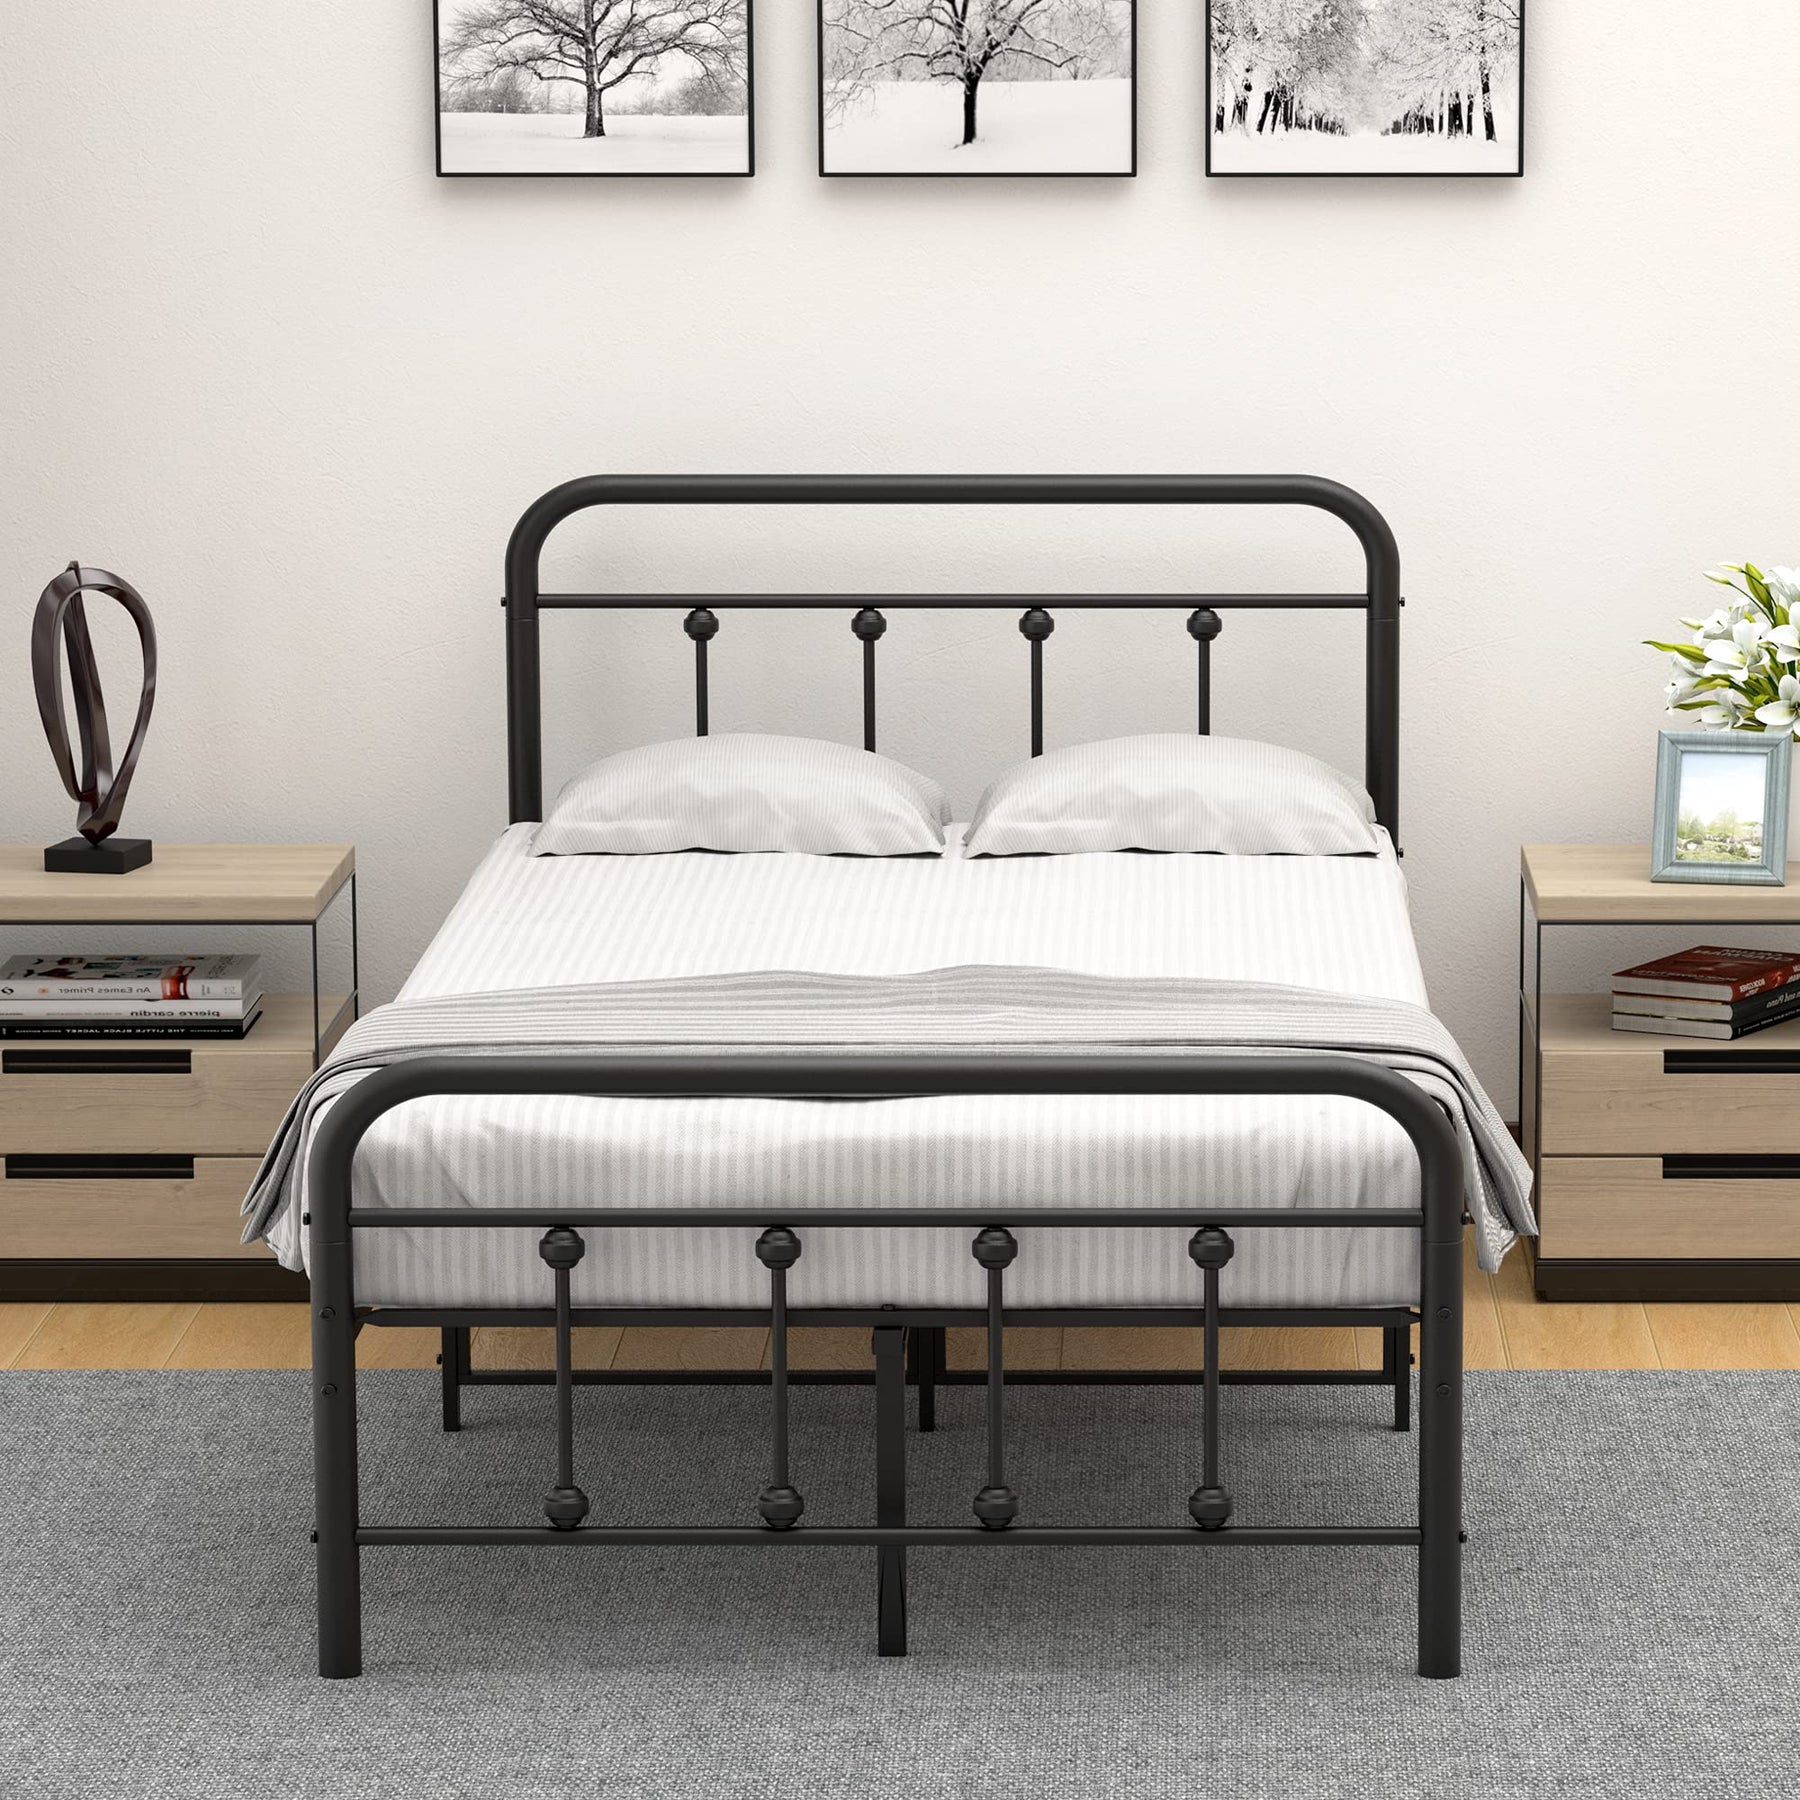 IDEALHOUSE Twin Size Metal Bed Frame with Victorian Headboard